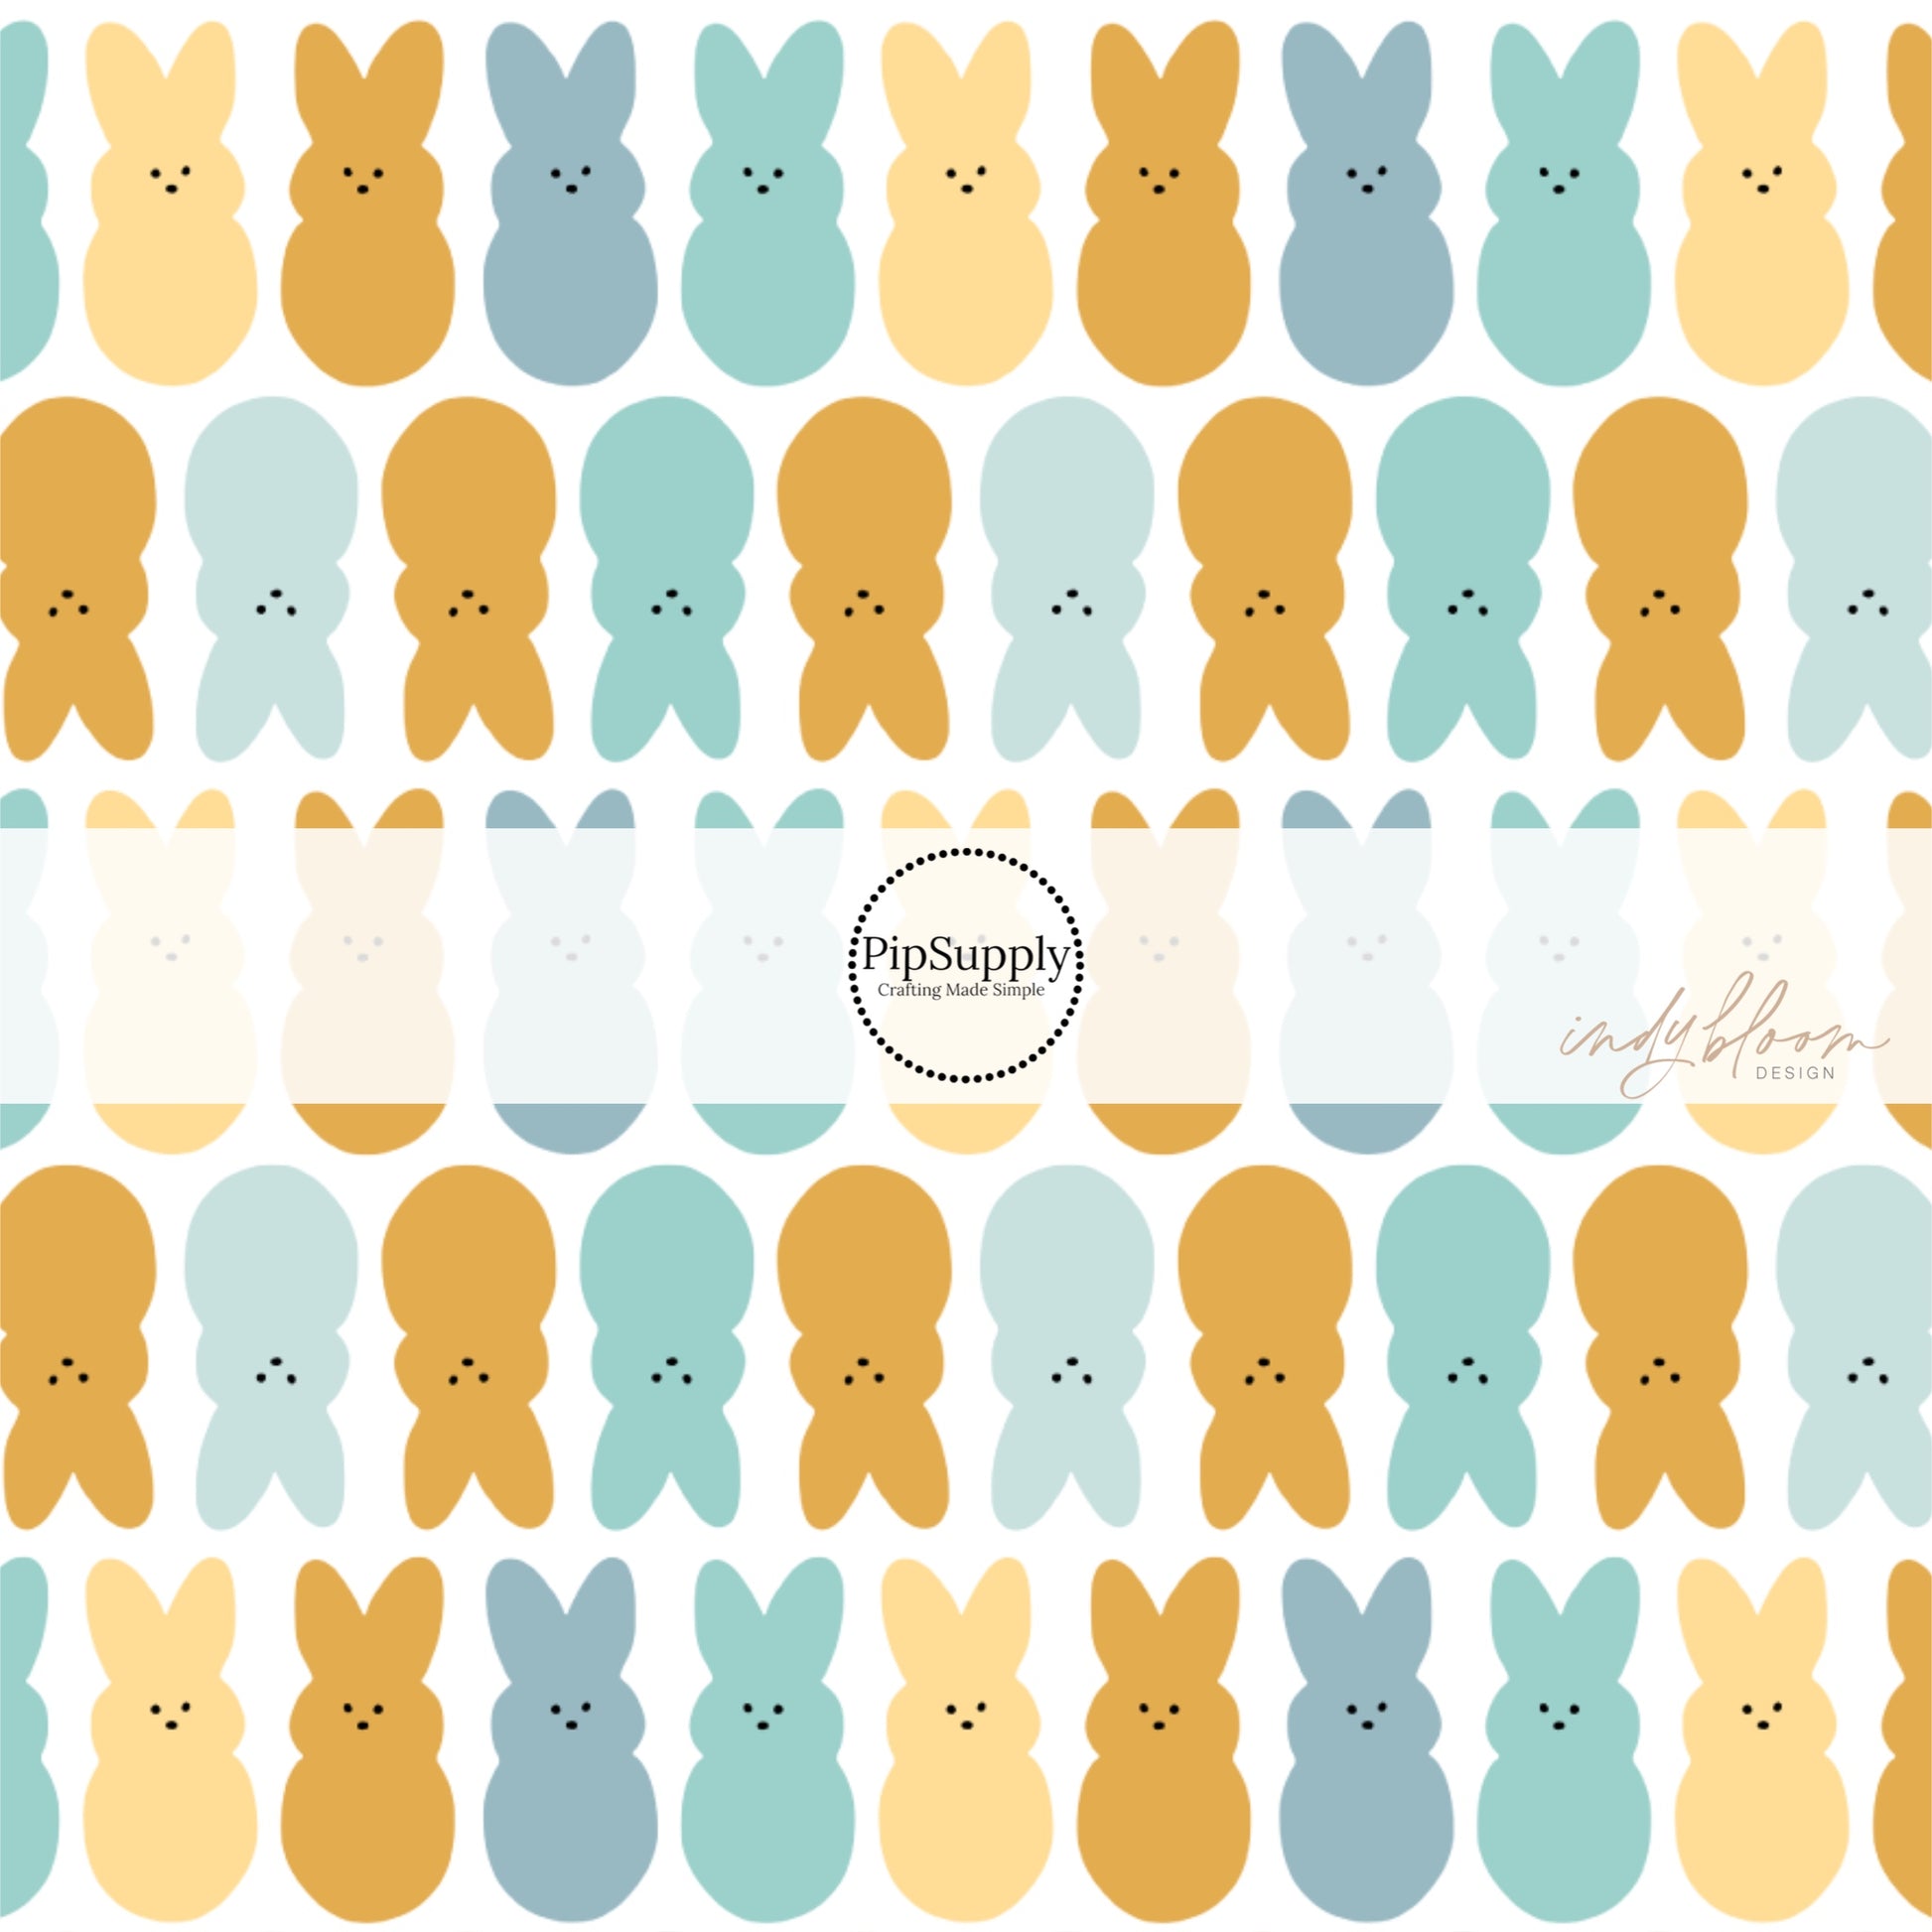 Blue, yellow, and brown bunnies on white bow strips